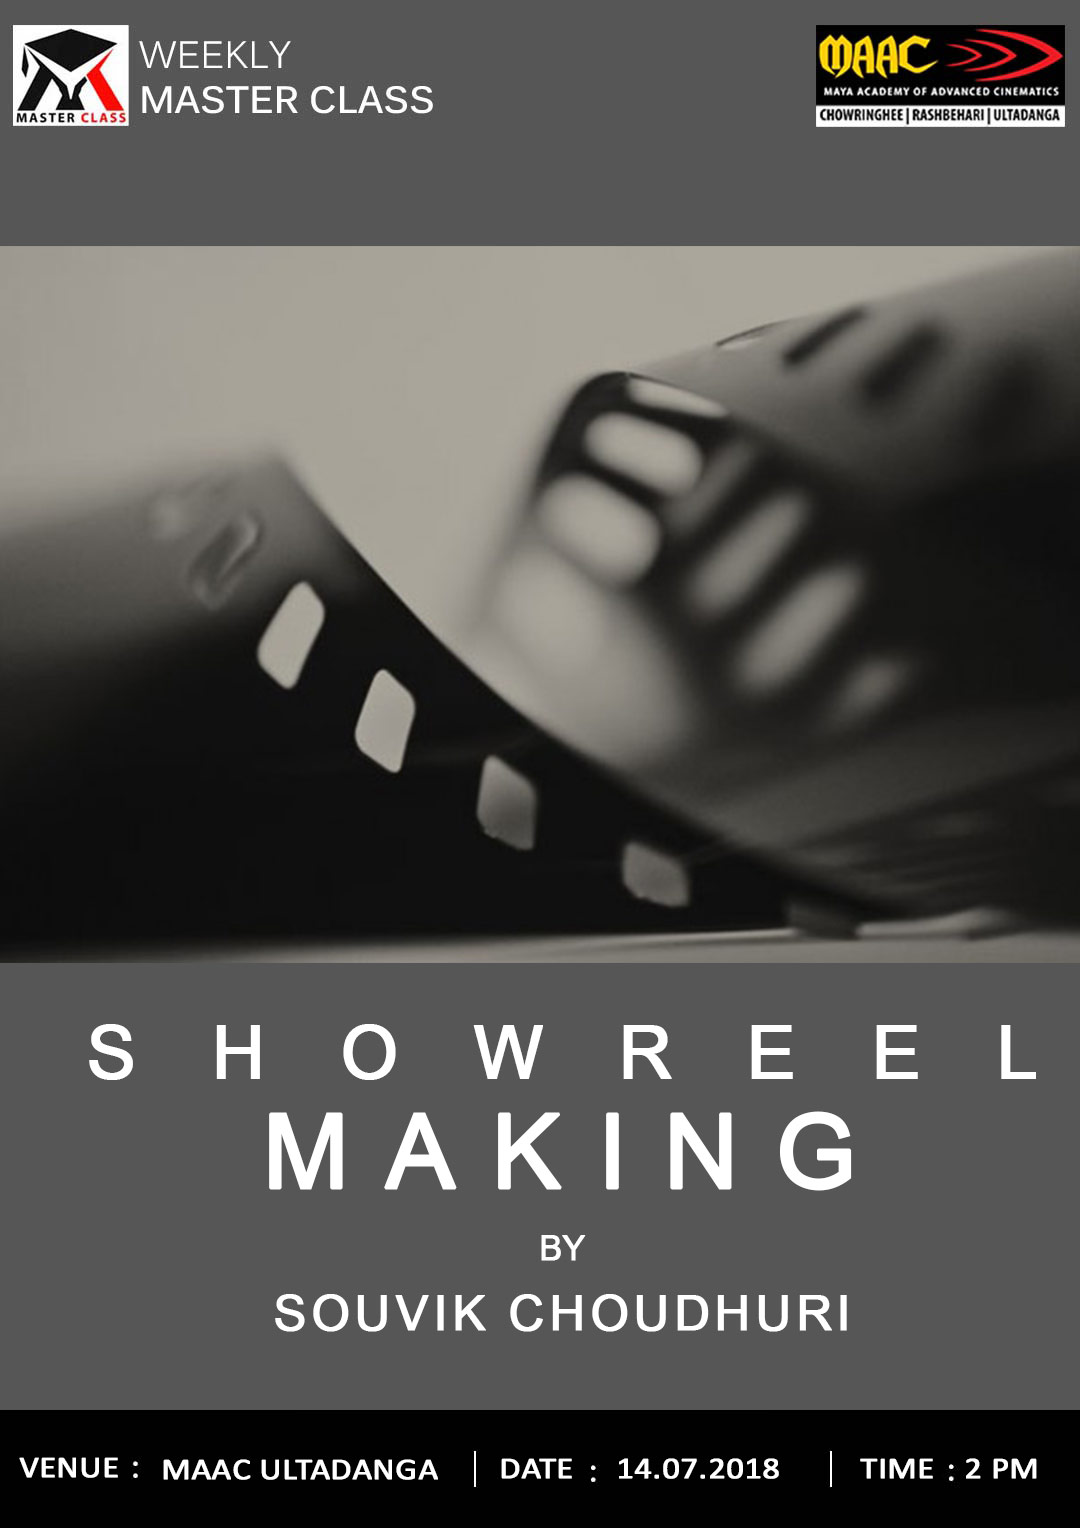 Weekly Master Class on Showreel Making